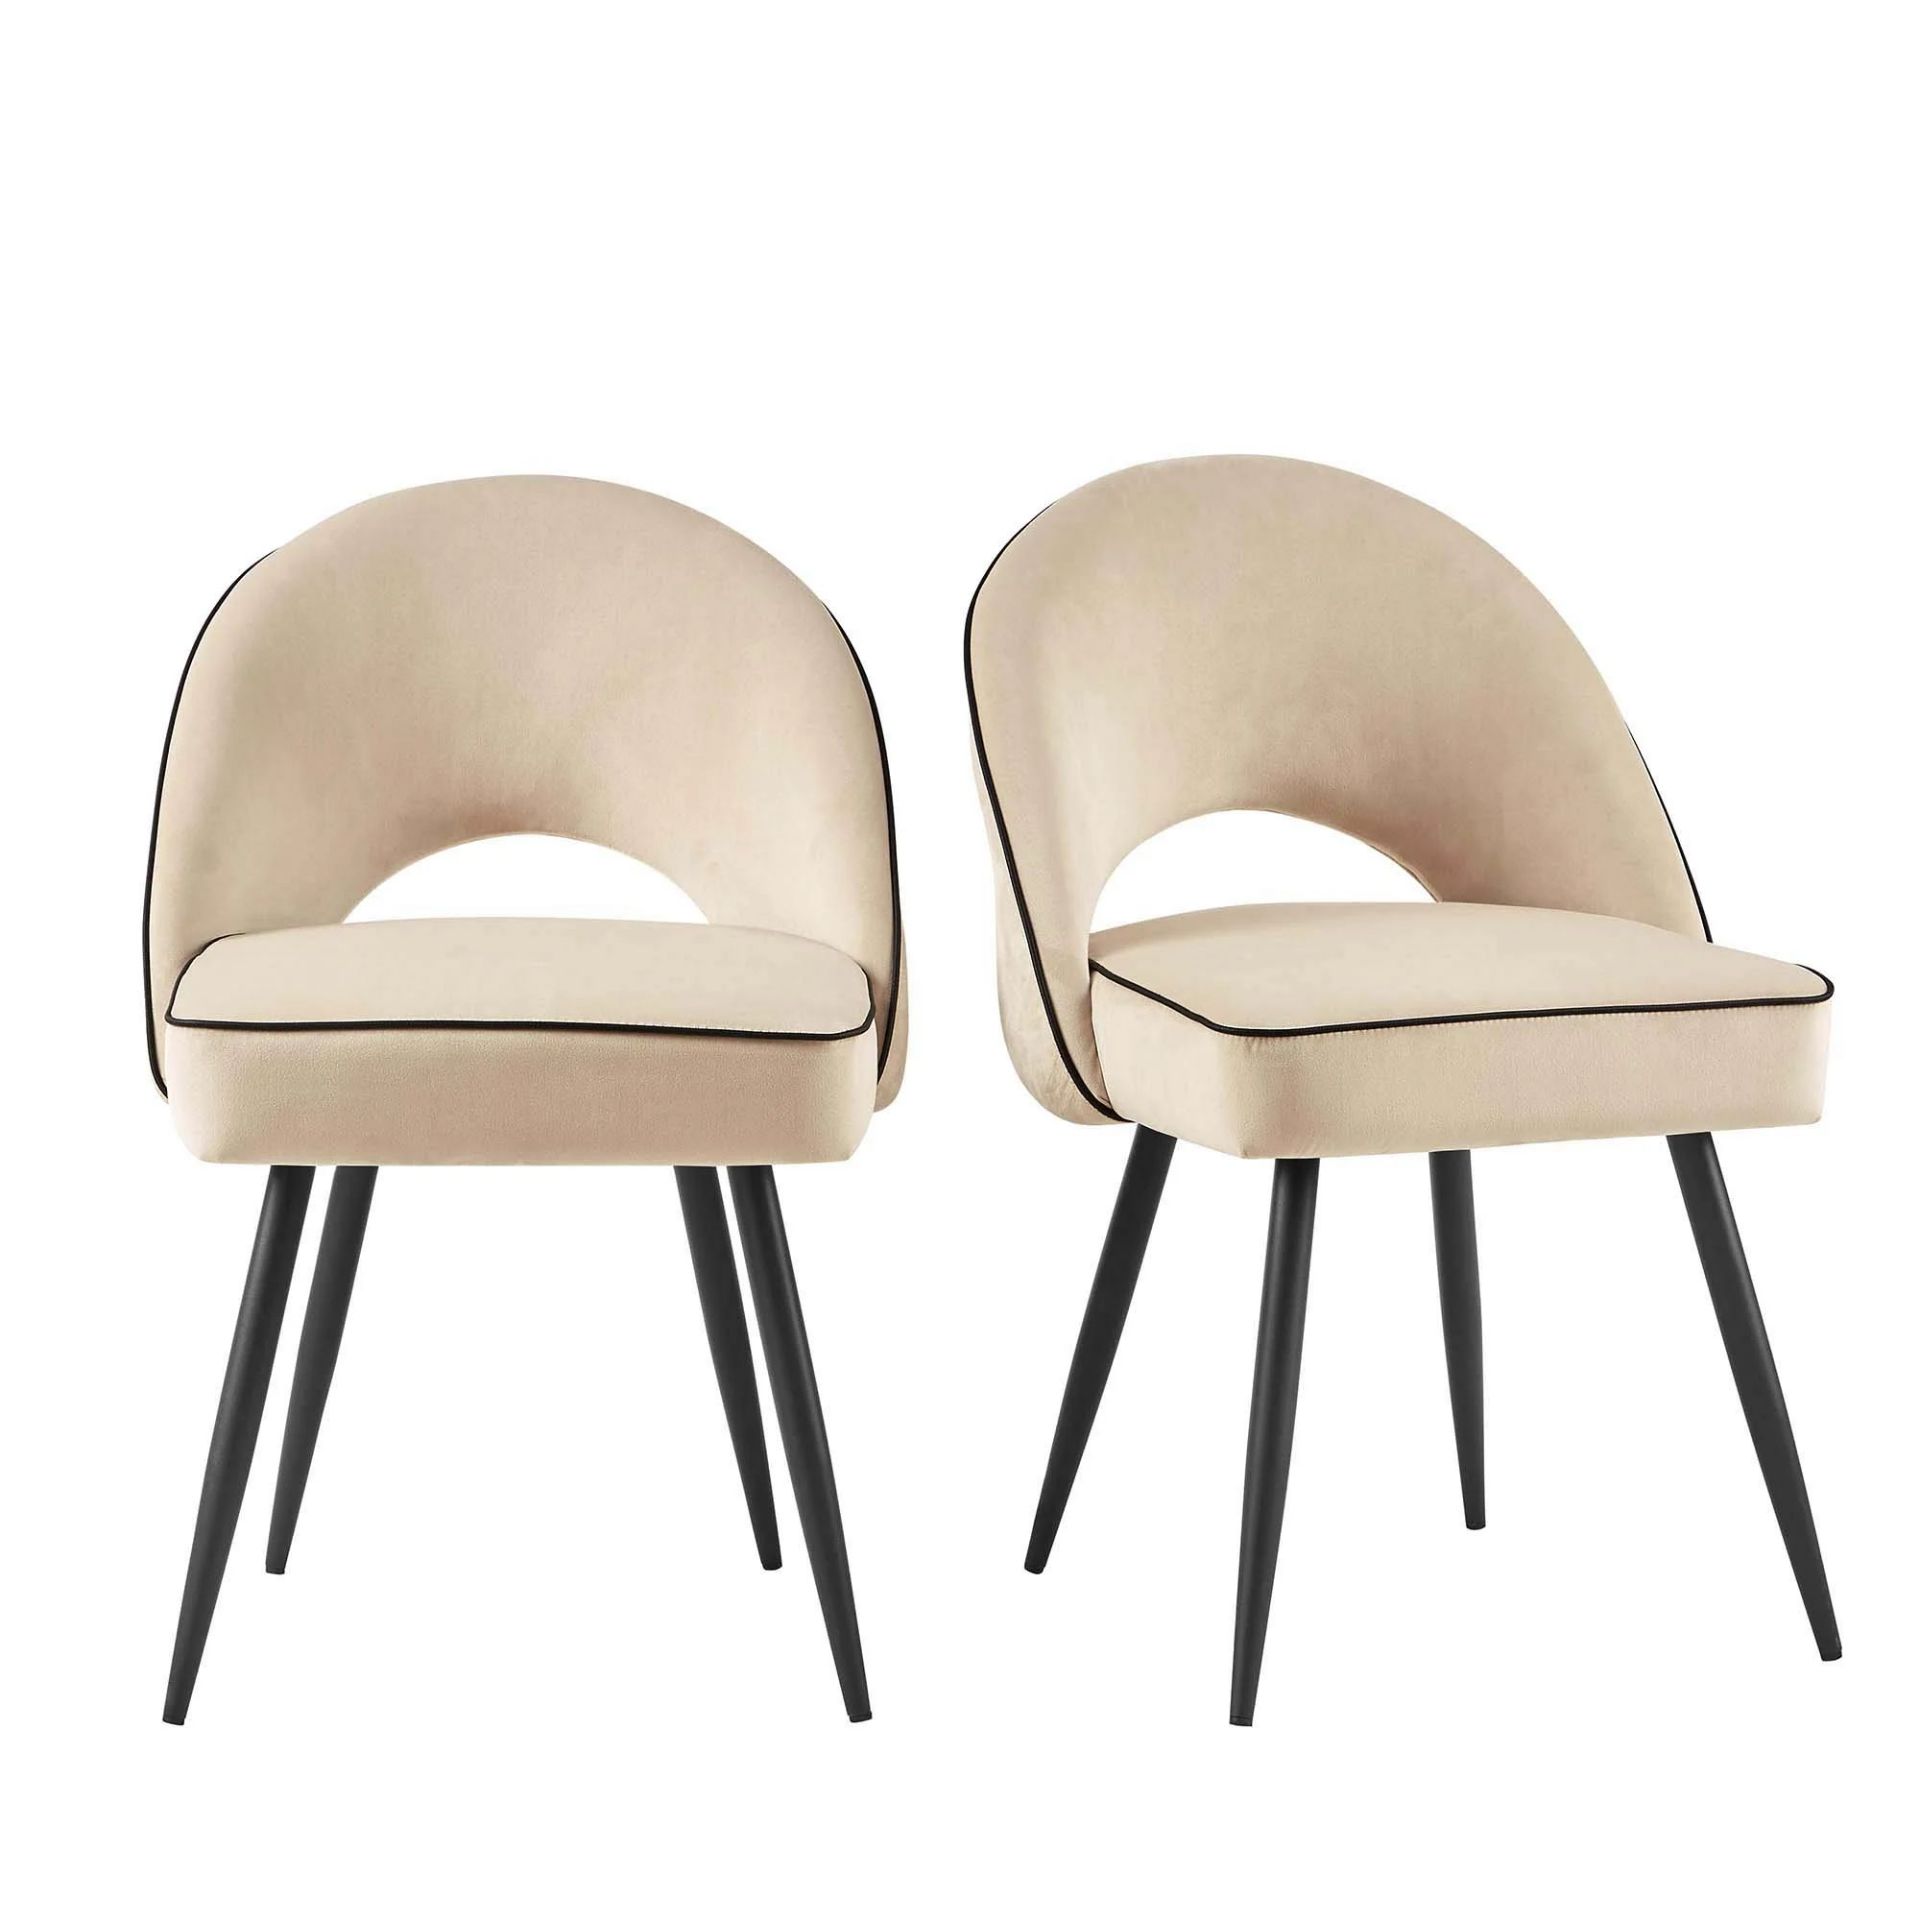 Oakley Set of 2 Champagne Velvet Upholstered Dining Chairs with Contrast Piping. - ER30. RRP £249. - Bild 2 aus 2